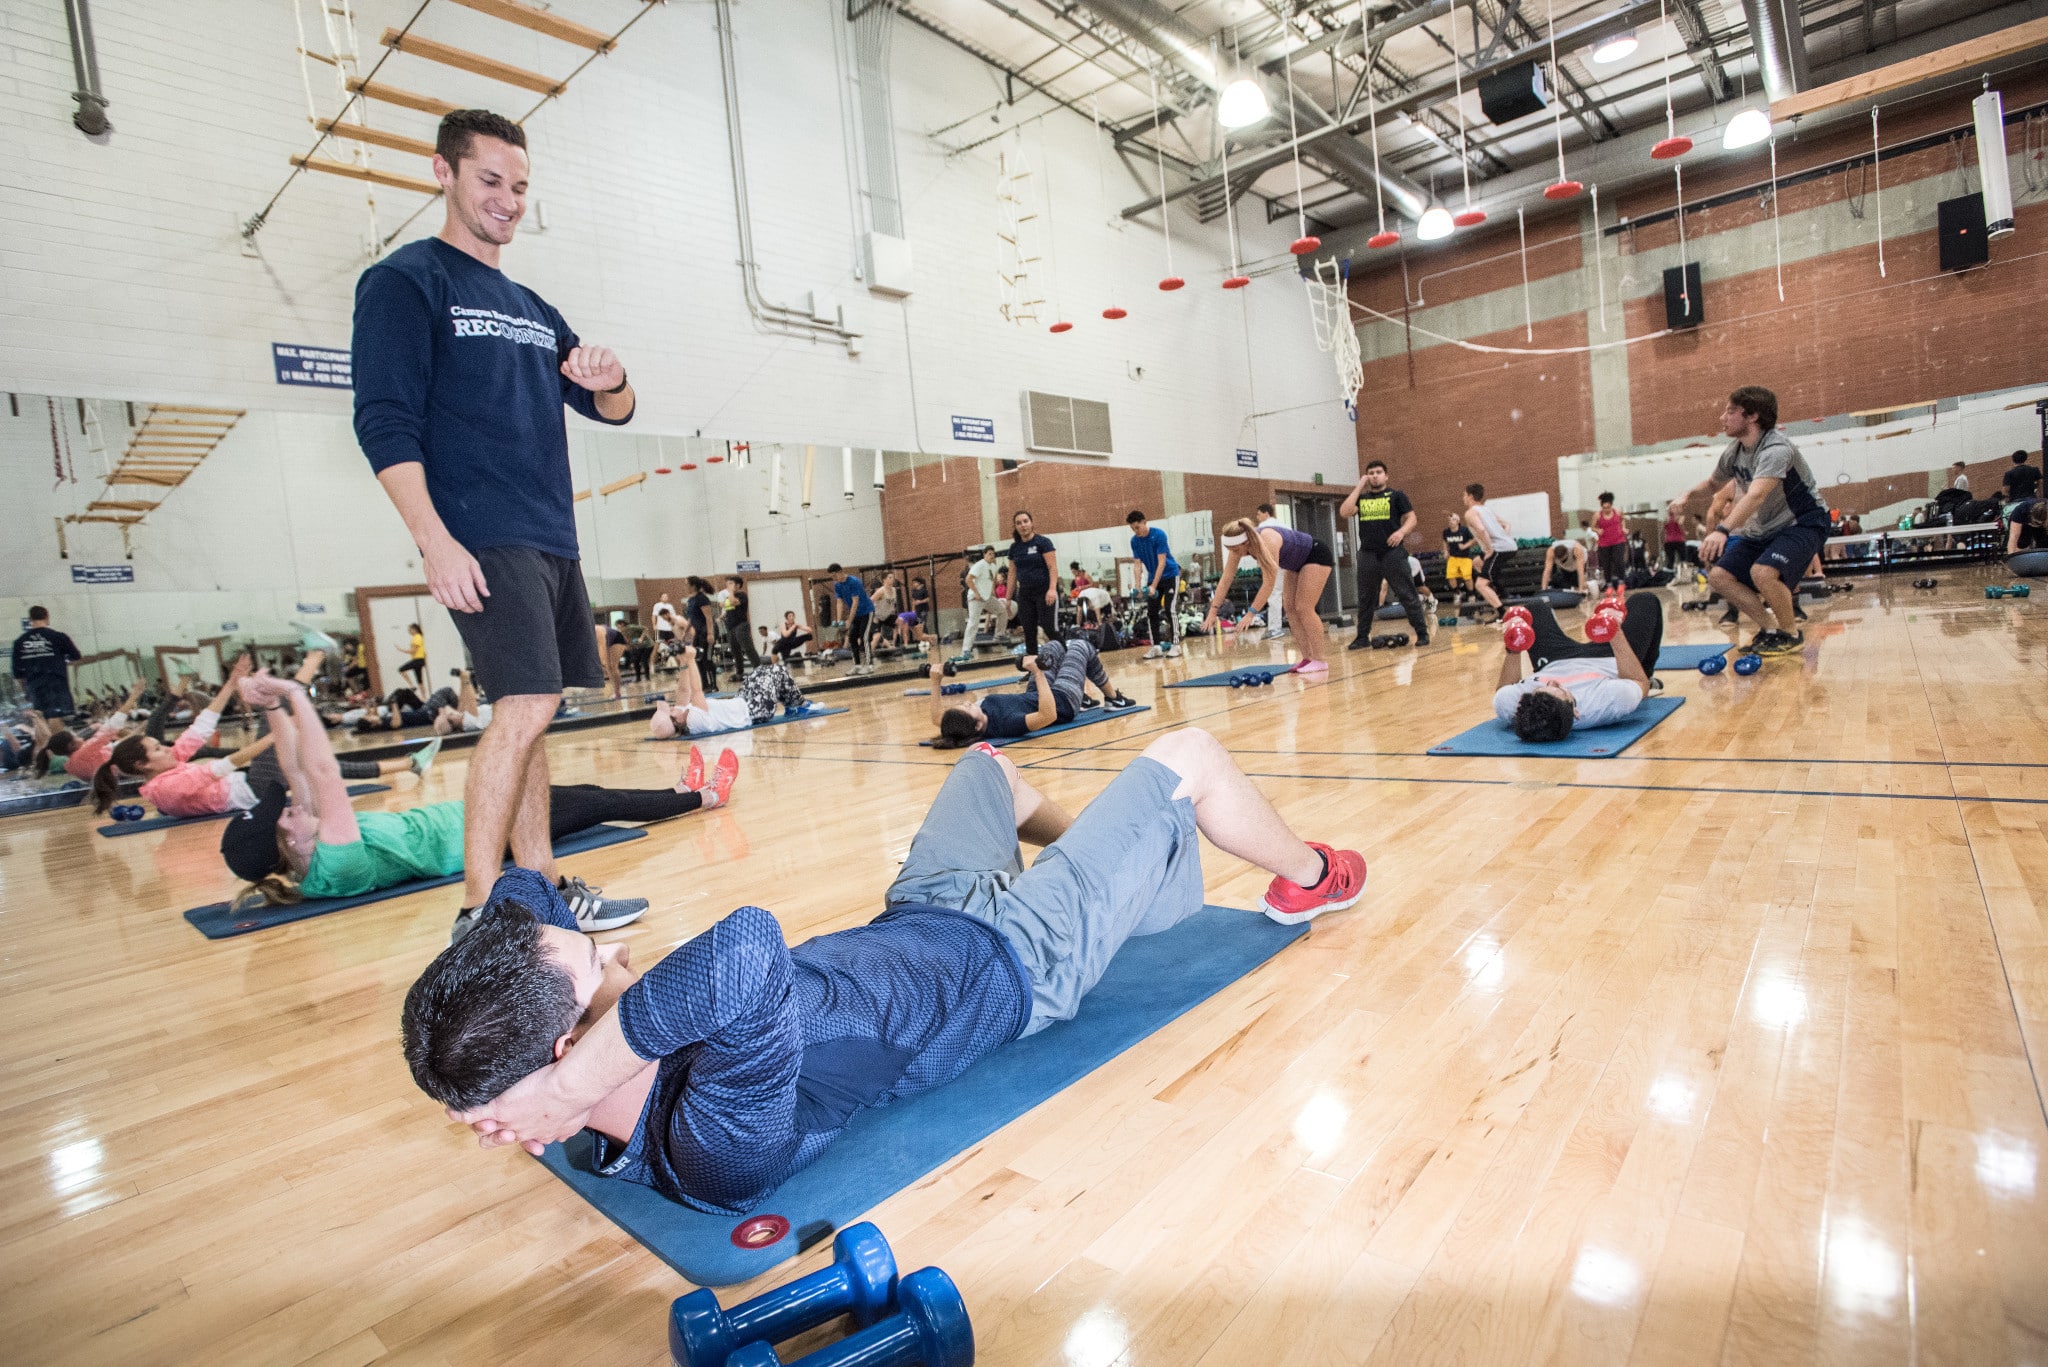 Student does sit ups in gym with instructor.